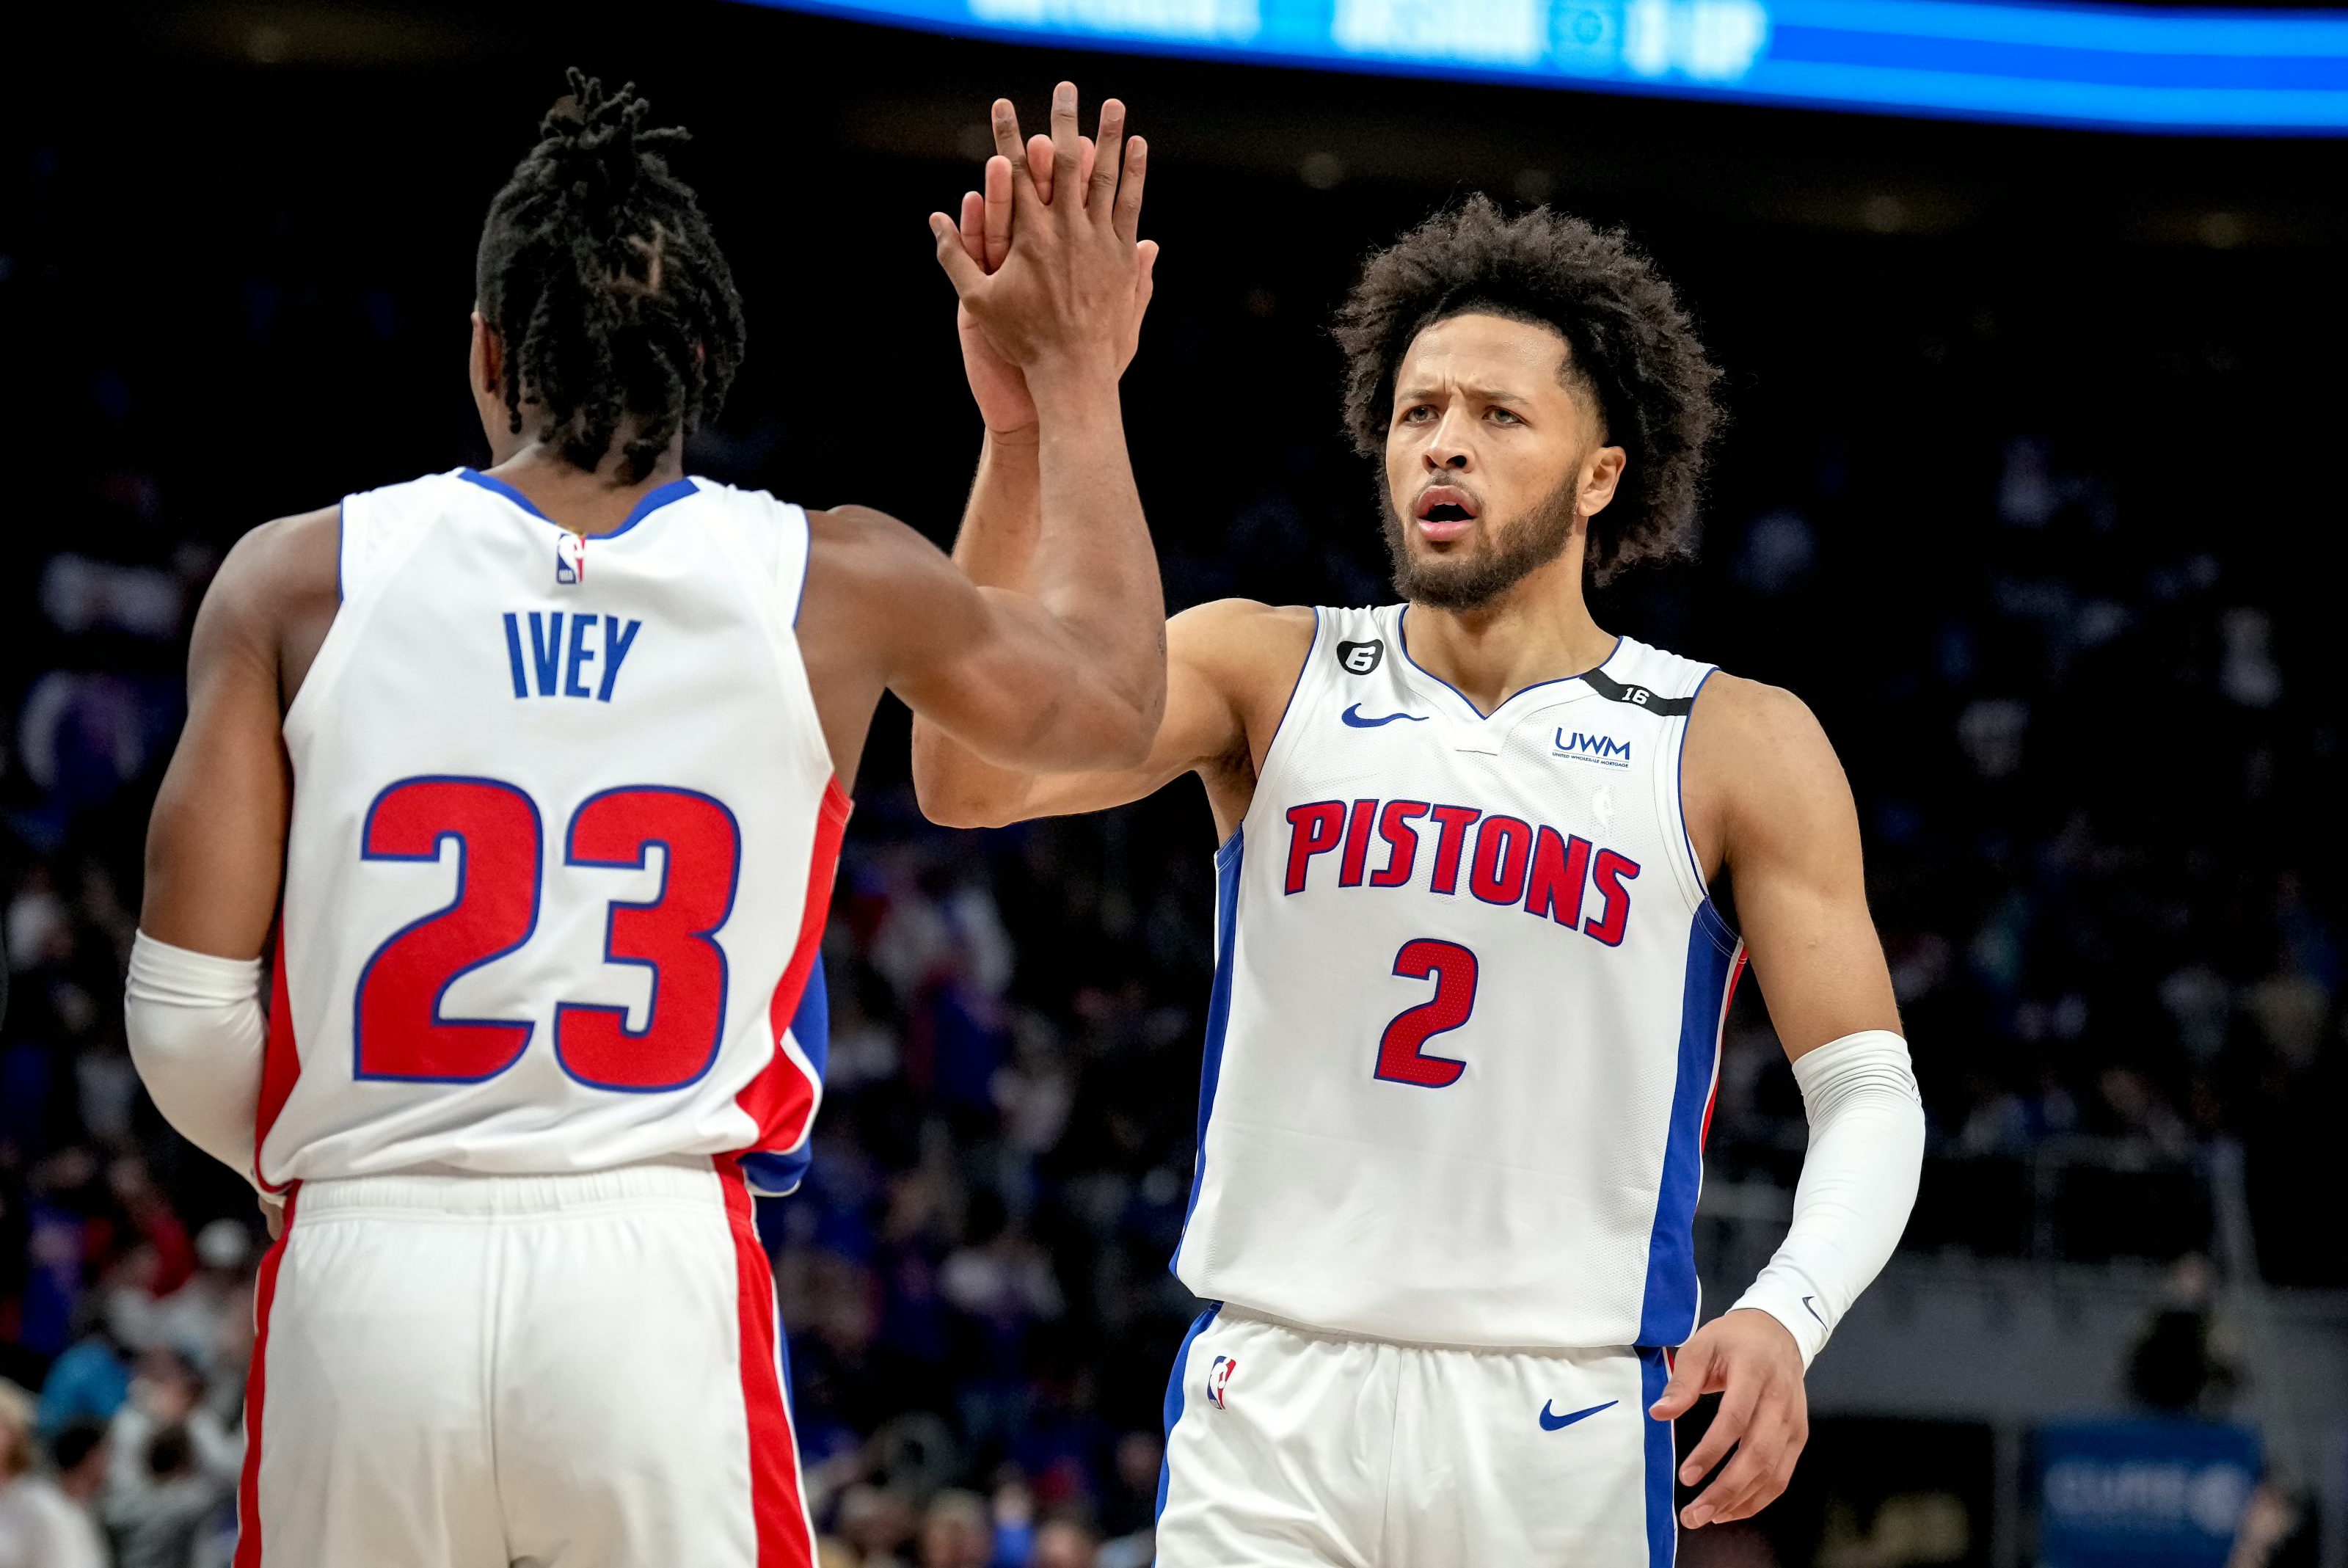 Pistons missed on one unicorn but could target another in free agency